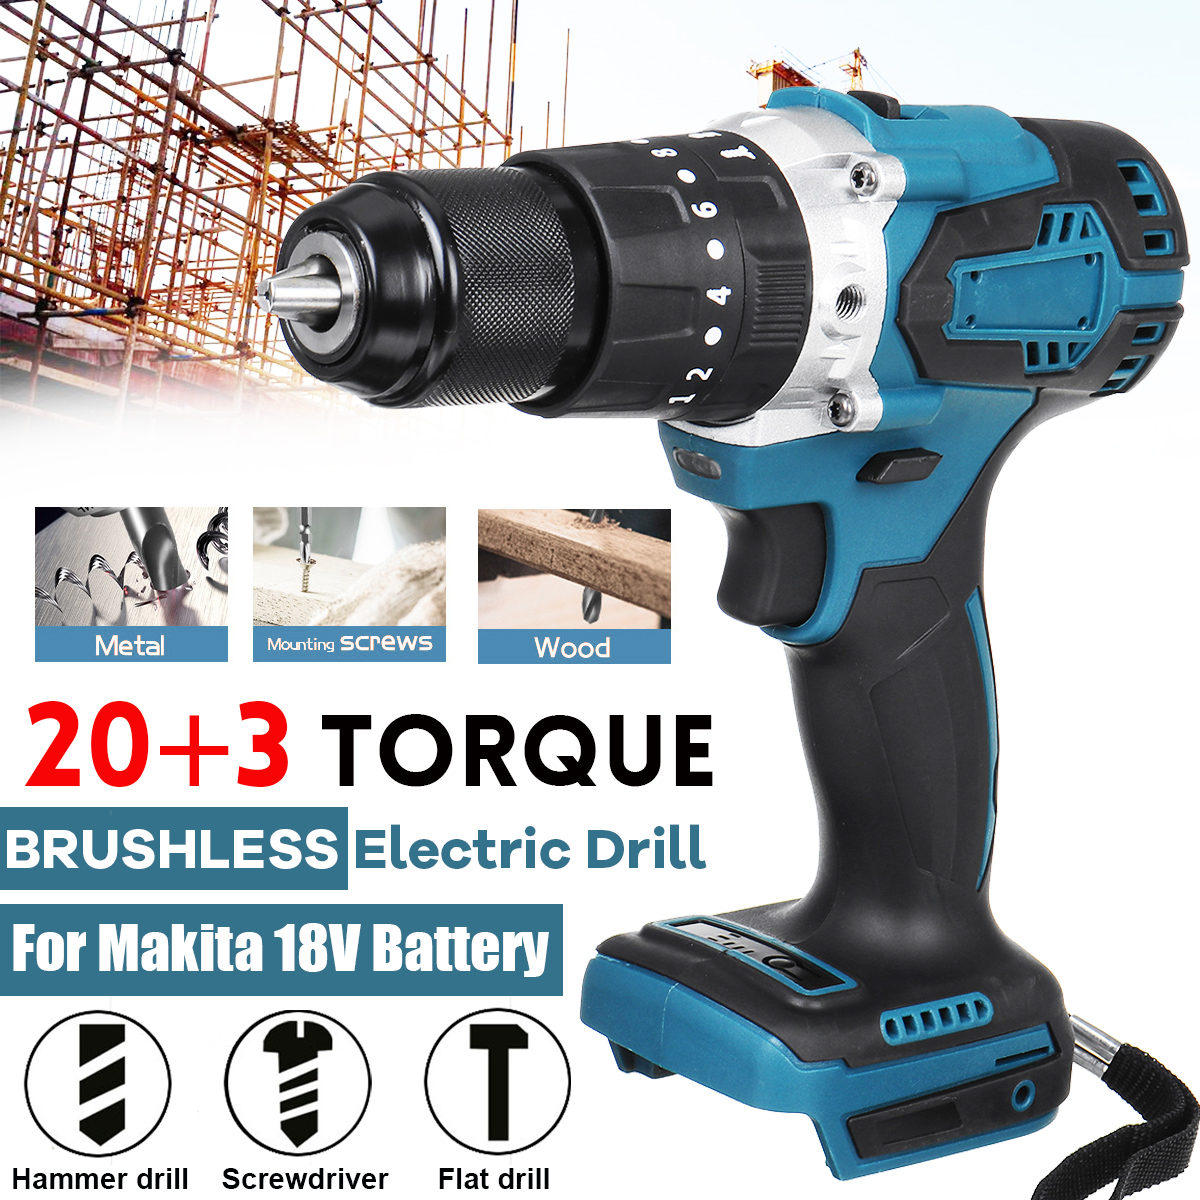 13mm-Chuck-Brushless-Cordless-Electric-Impact-Drill-Hammer-Screwdriver-For-Makita-18V-Battery-1855970-1